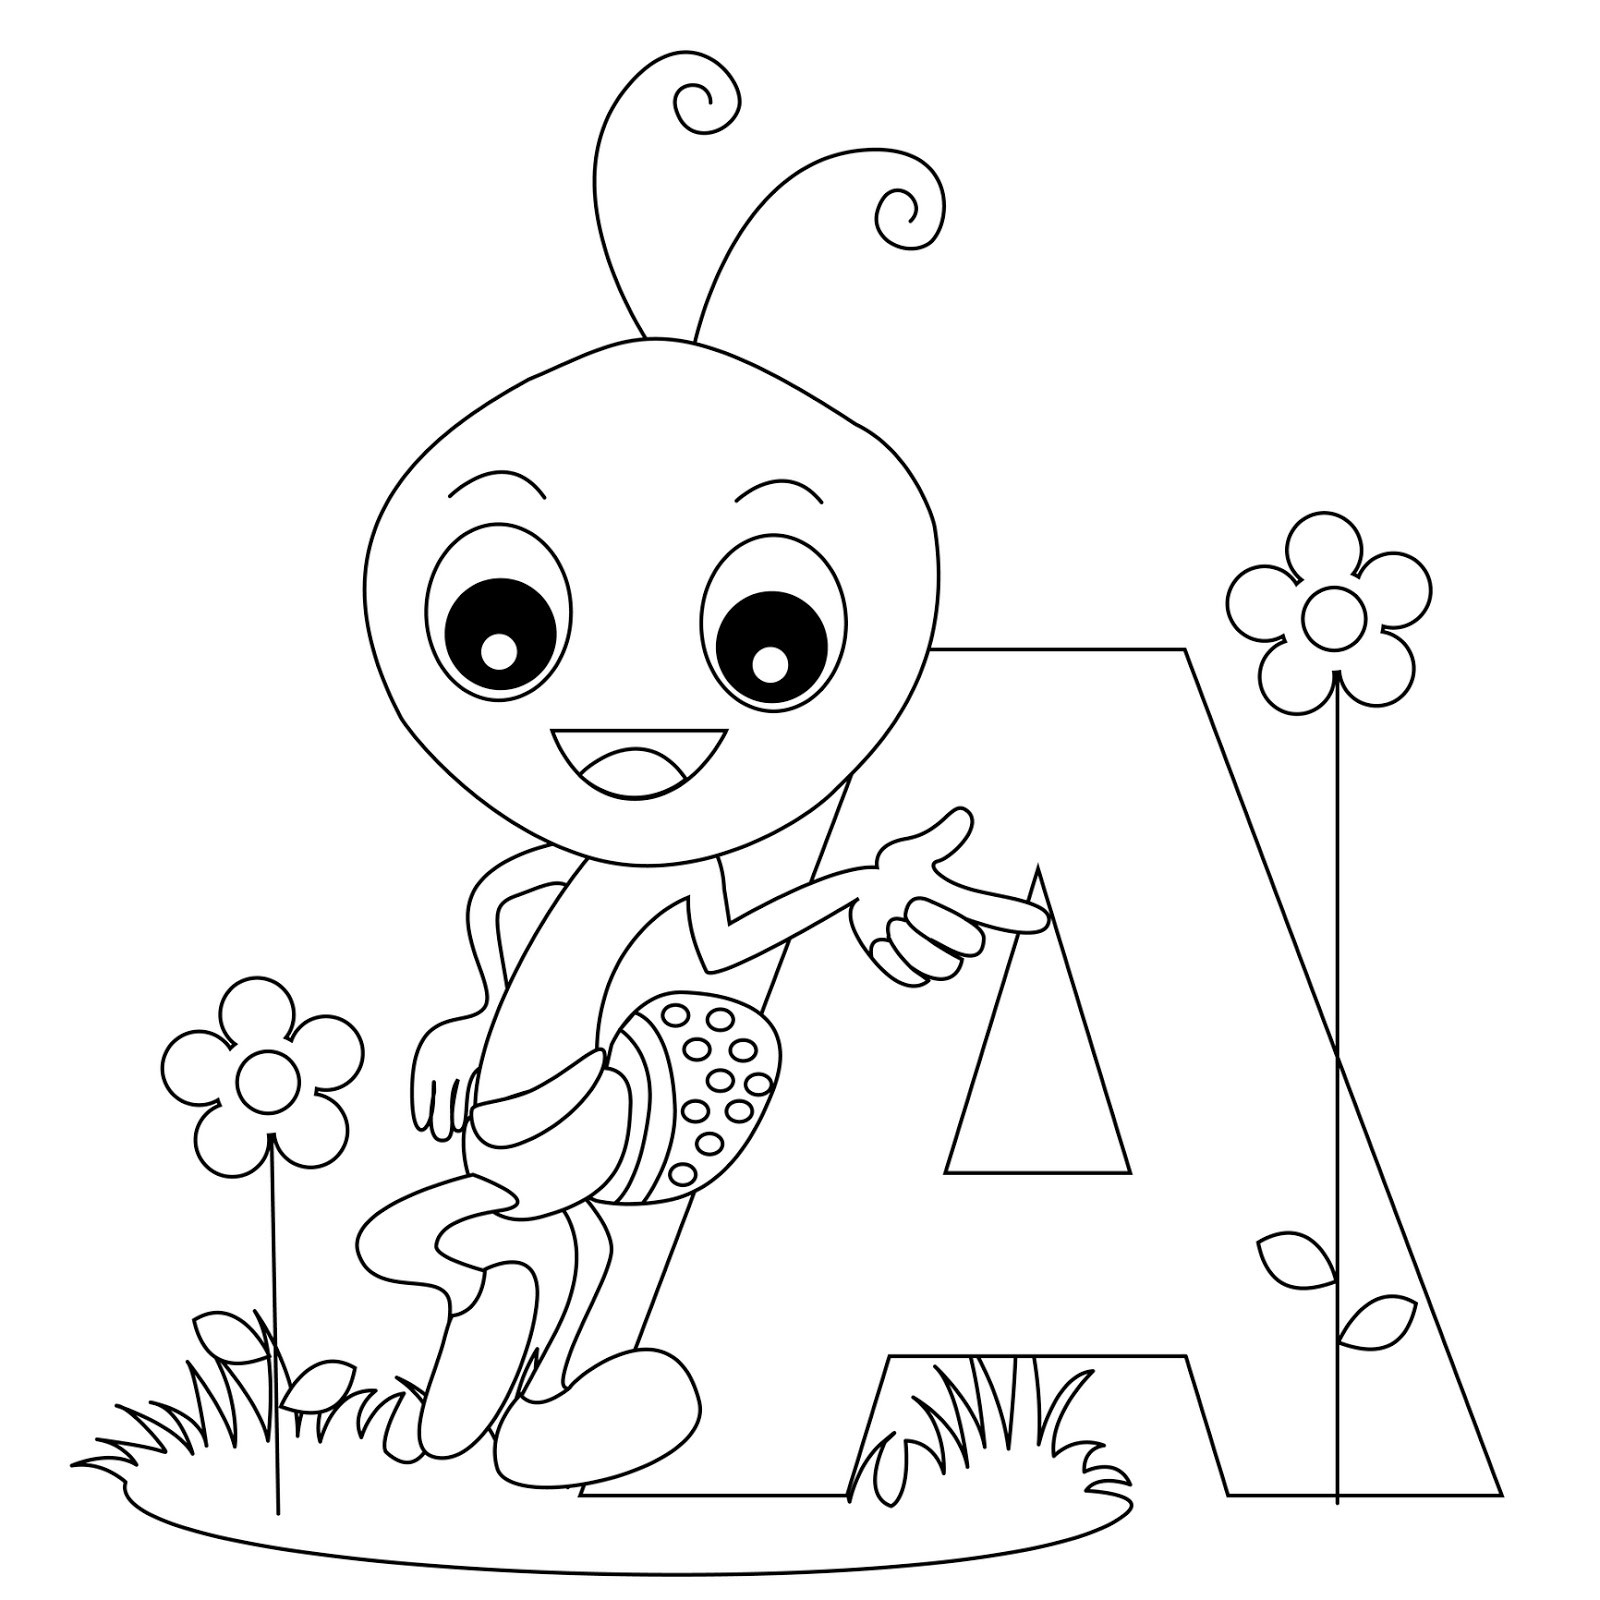 Abc Coloring Pages For Toddlers
 Animal Alphabet Letter A coloring Child Coloring